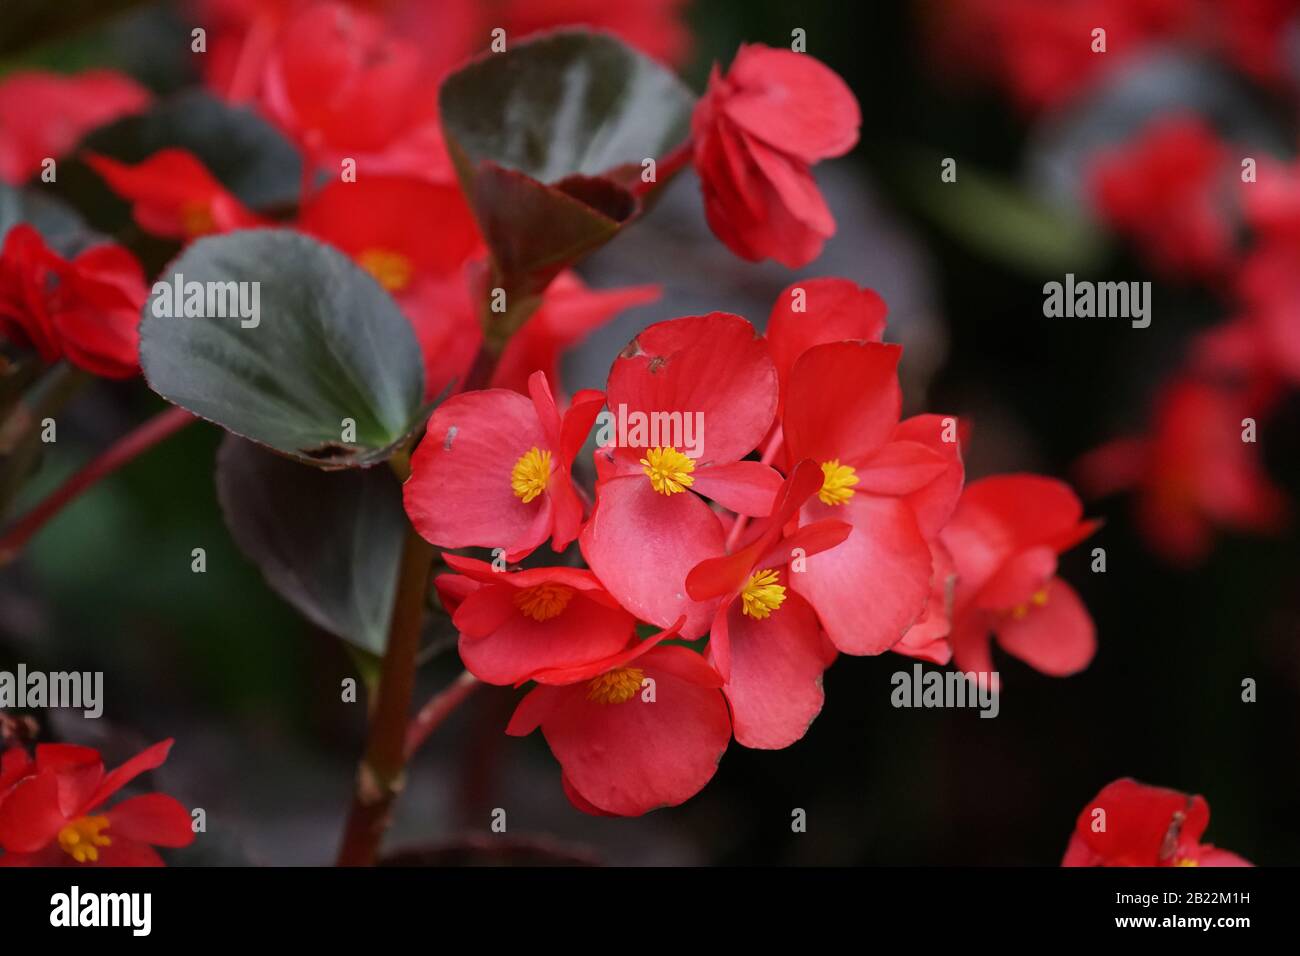 Closeup of bronze leaf Begonia red flowers used as bedding plants in a garden in South Africa concept abstract nature background Stock Photo